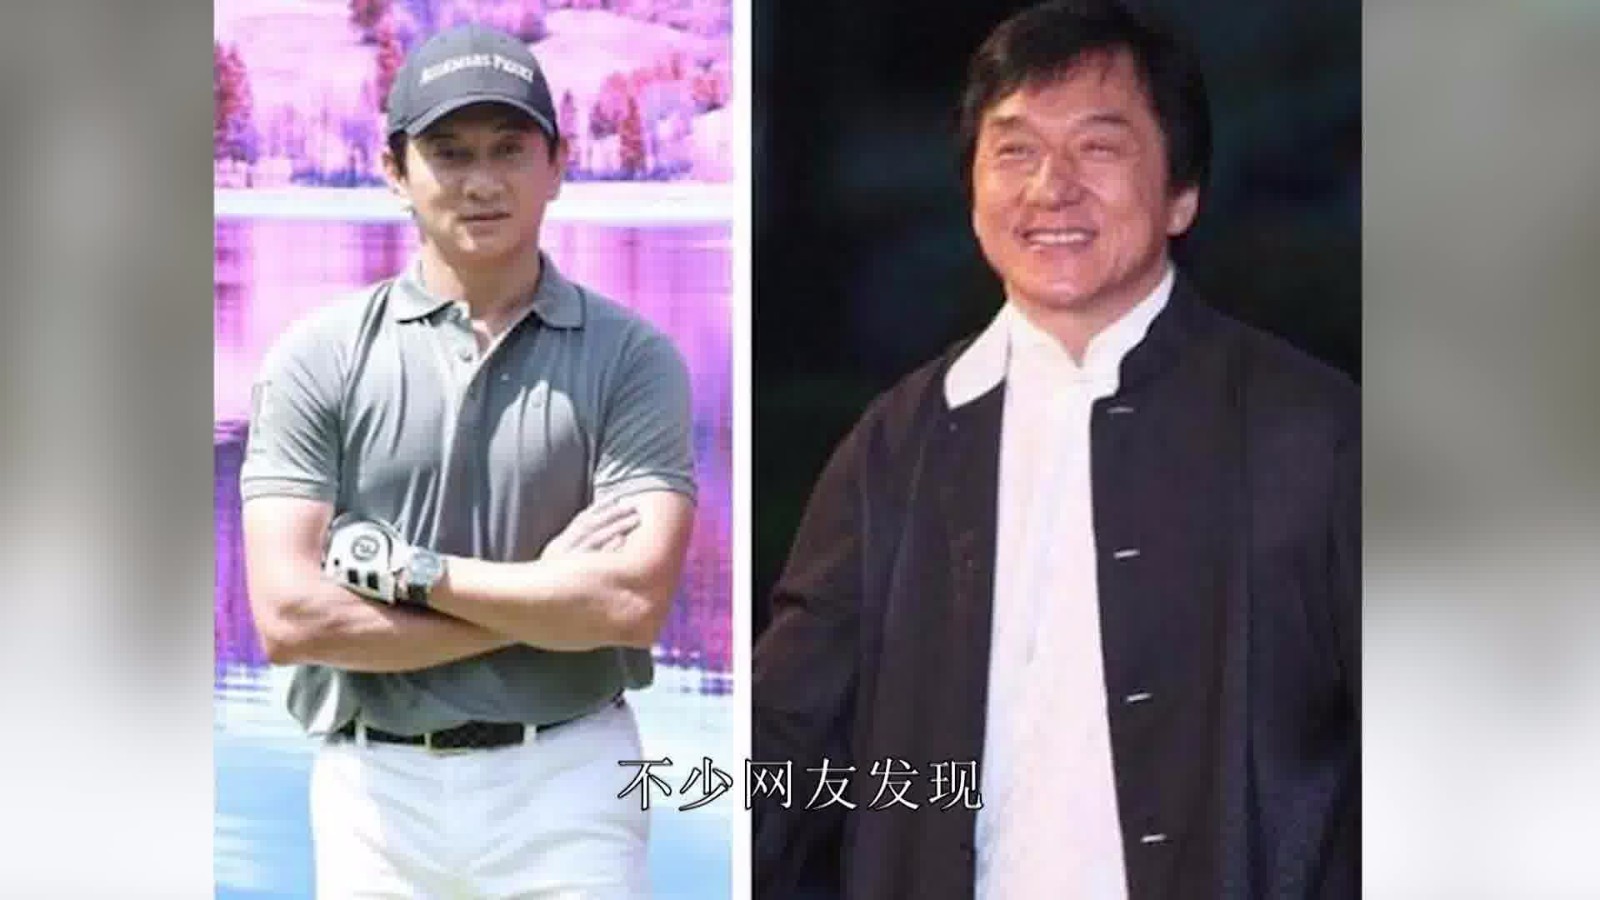 Wu Qilong's fortune bumps into Jackie Chan's face, and his idol turns into a tough man. Is life too happy after marriage?